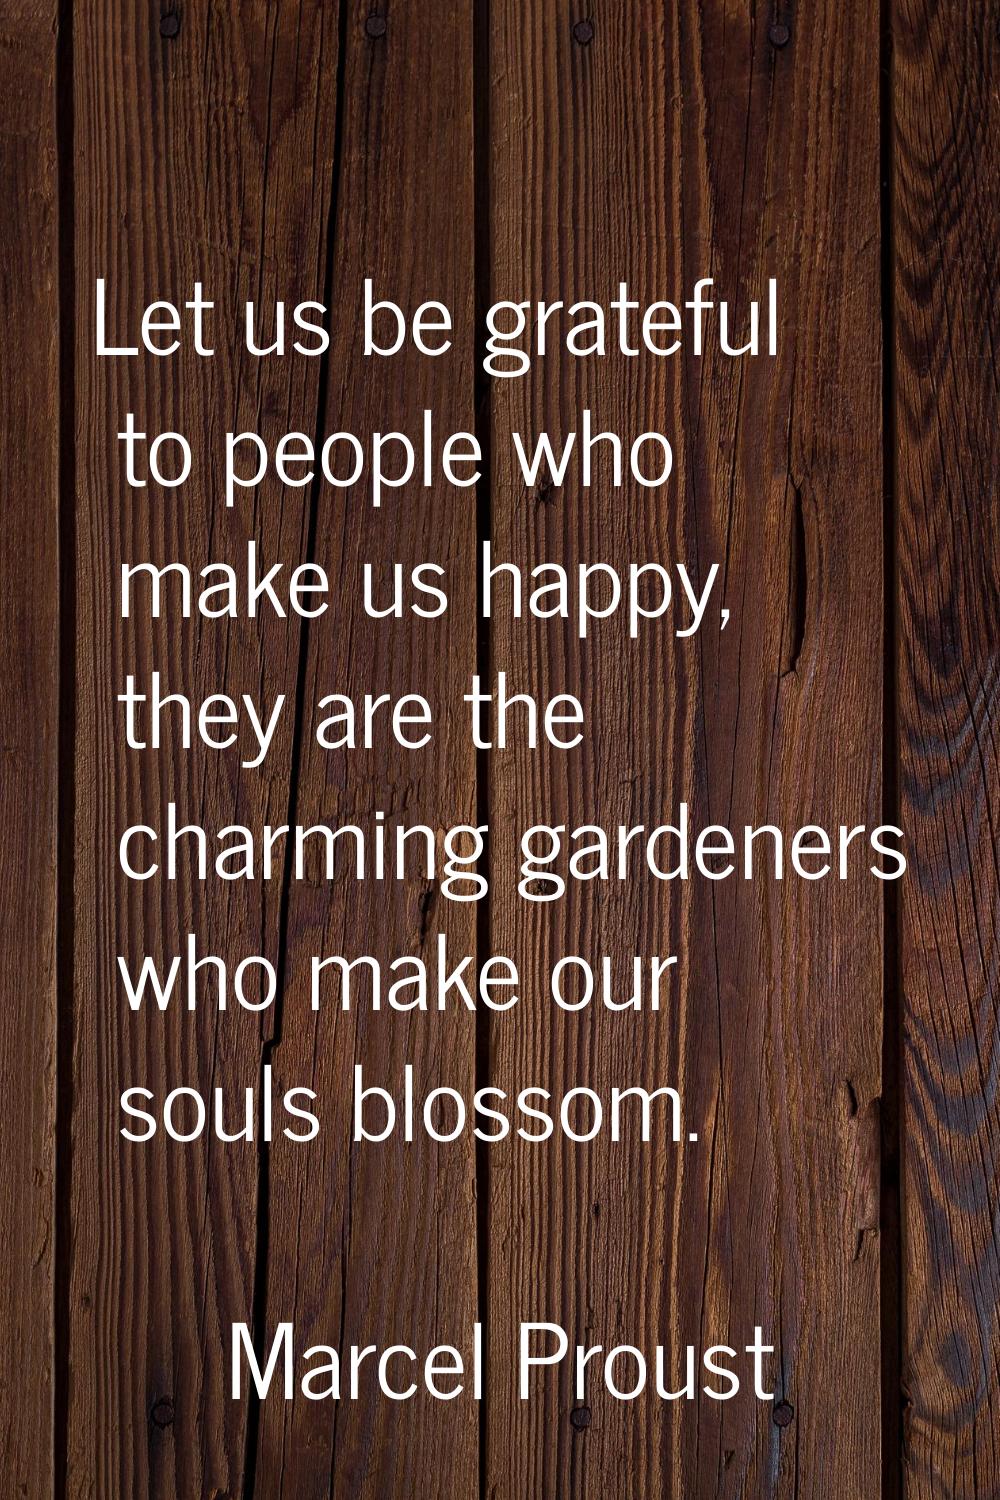 Let us be grateful to people who make us happy, they are the charming gardeners who make our souls 